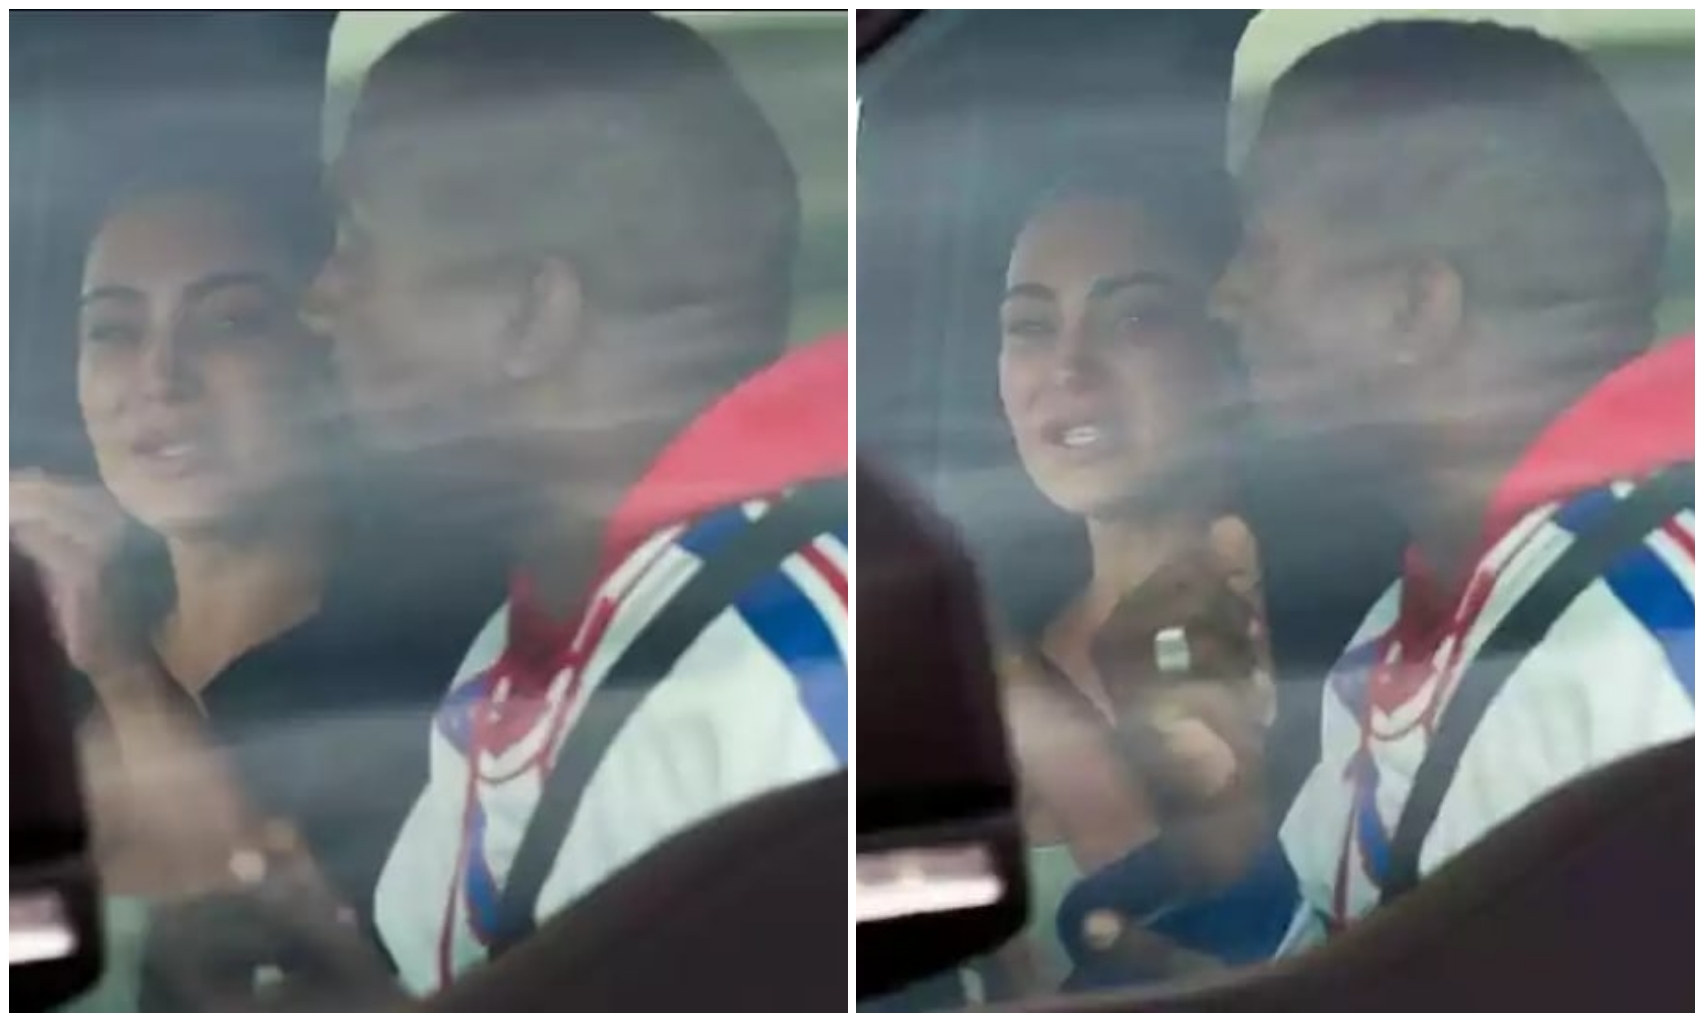 Kim Kardashian breaks down in tears as she reunites with Kanye West amidst marriage crisis